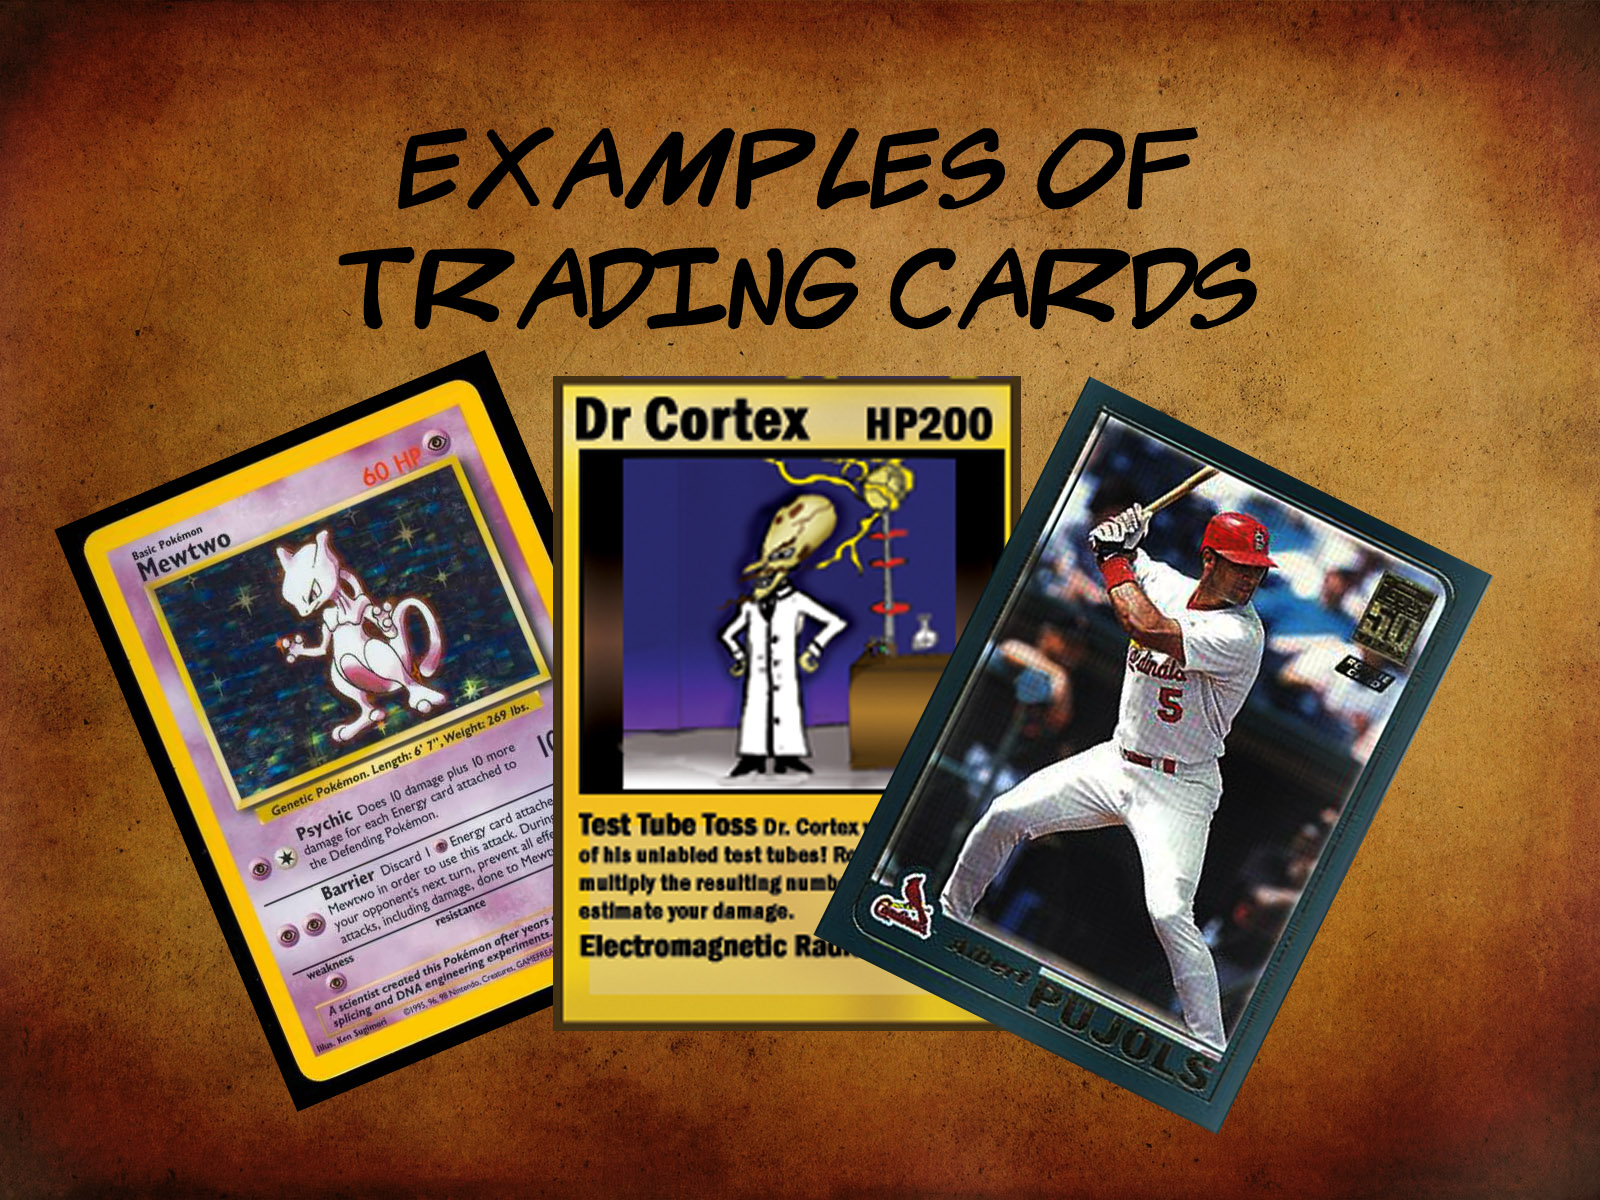 make-the-card-make-your-own-trading-card